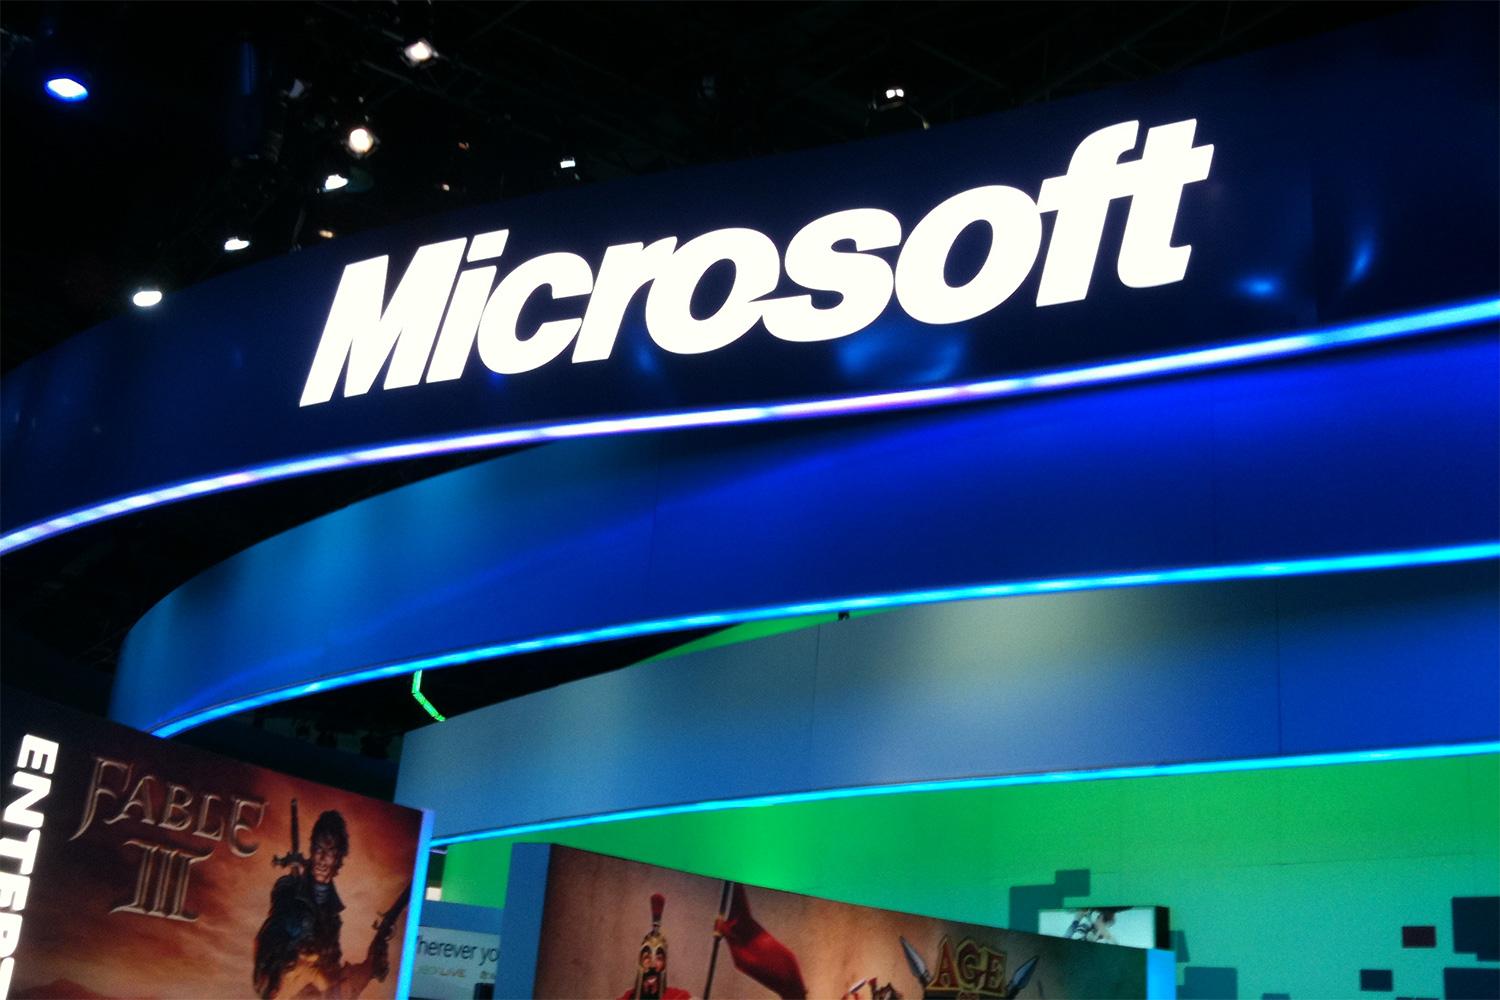 http://www.digitaltrends.com/wp-content/uploads/2014/01/microsoft-ces-booth.jpg